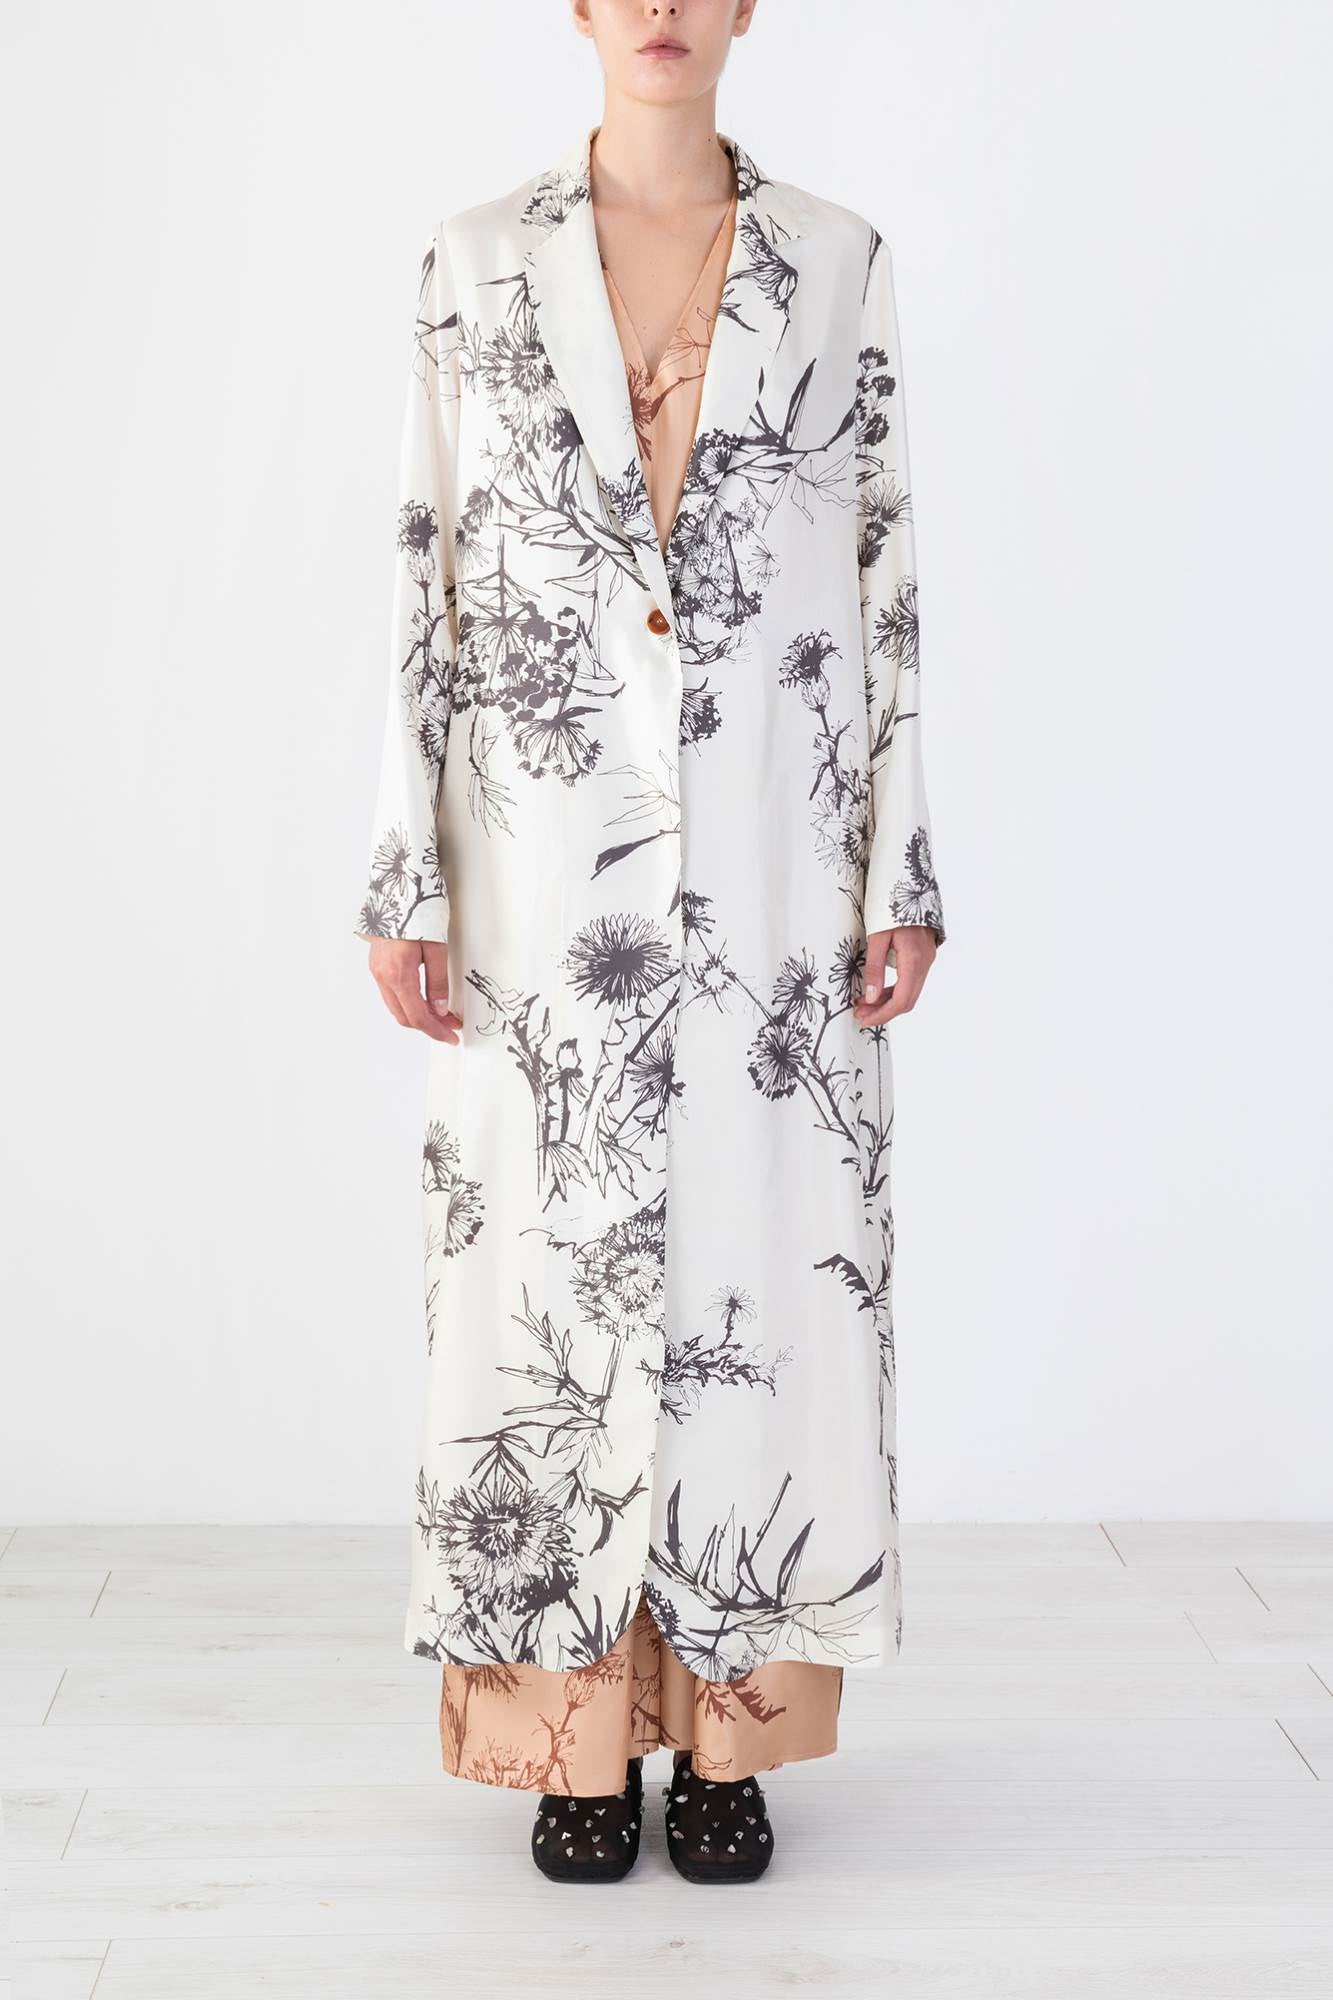 TAILORED DUSTER COAT WITH “DANDY LION” PRINT